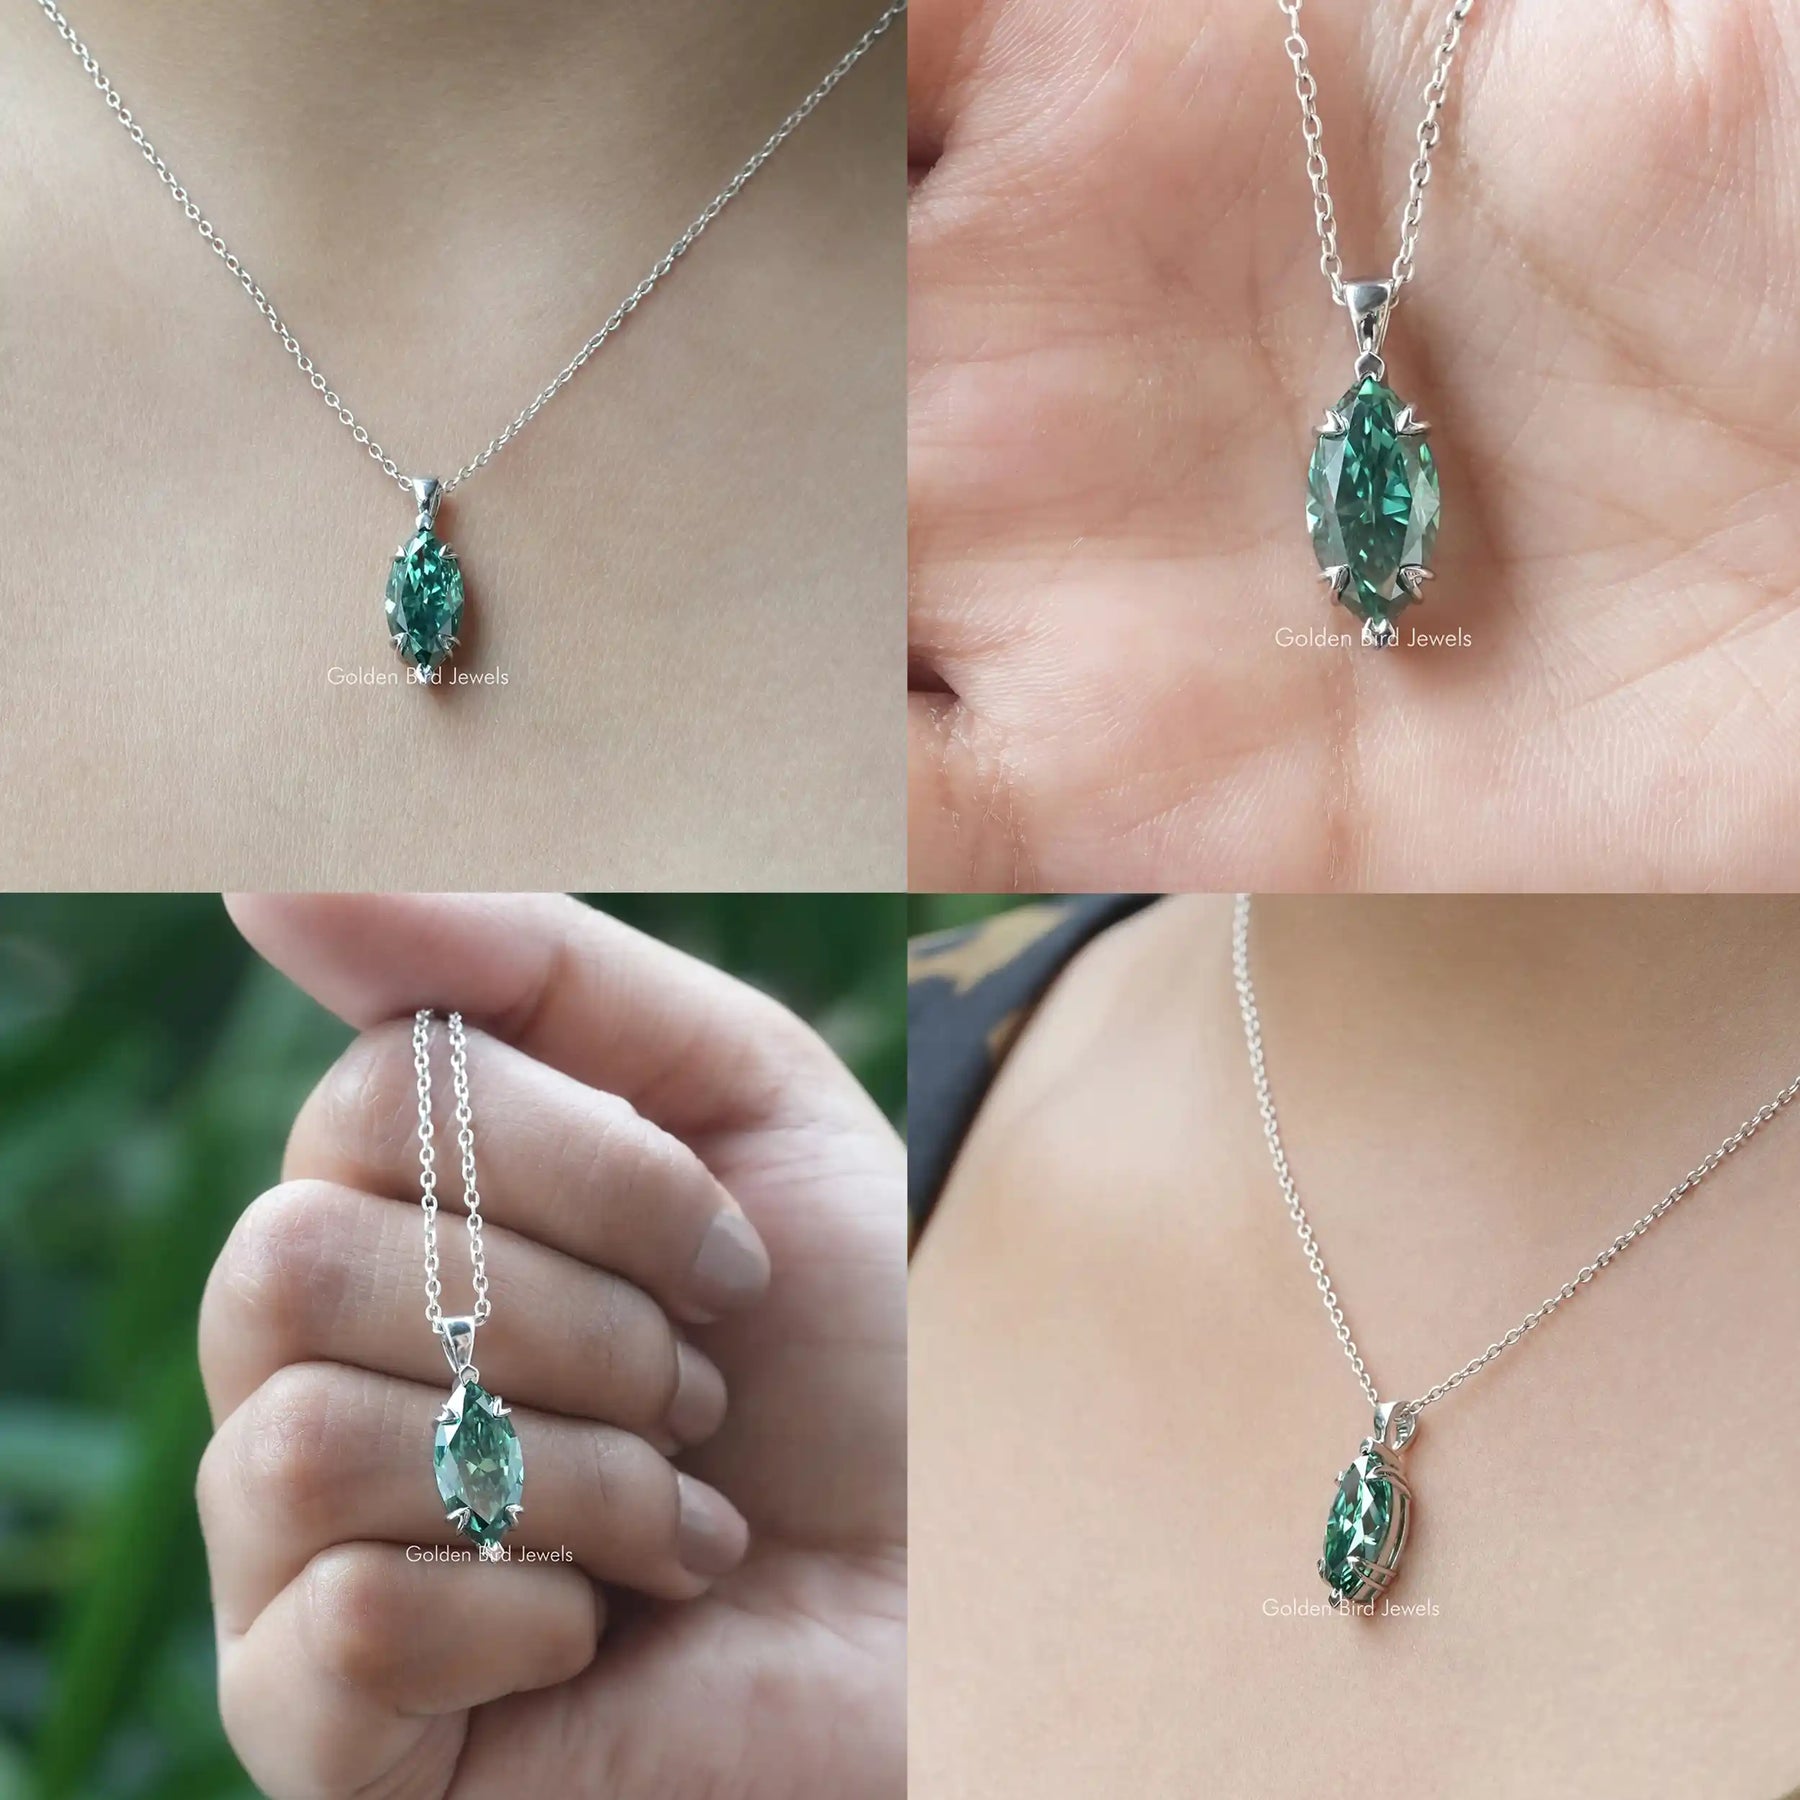 [Collage of green marquise cut moissanite pendant]-[Golden Bird Jewels]